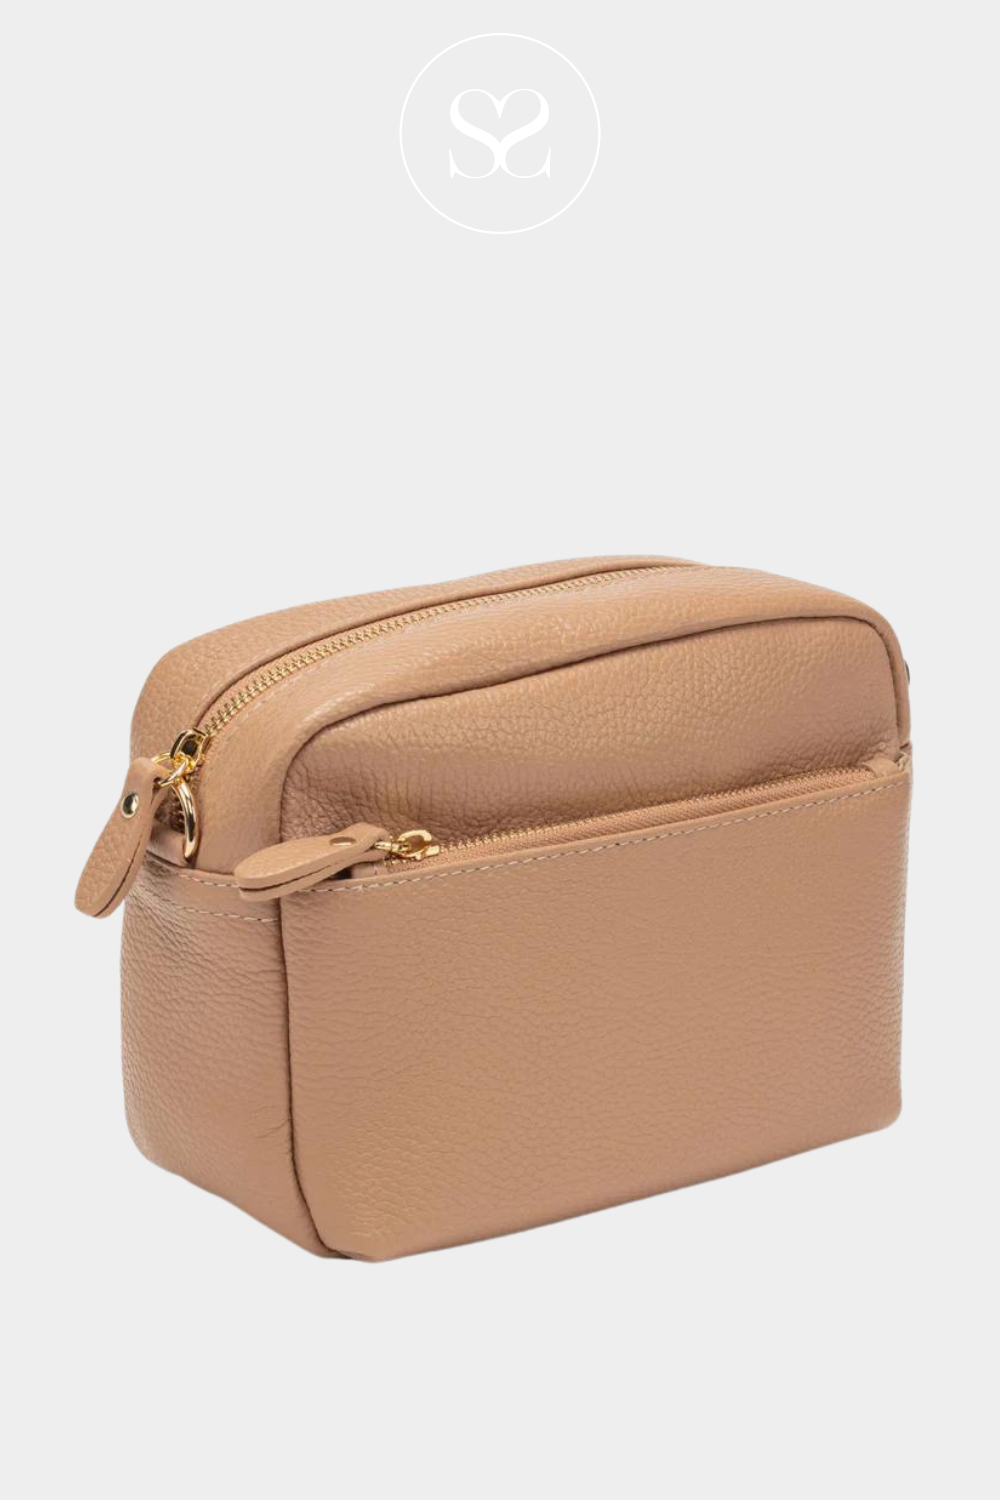 spacious beige leather crossbody bag from Elie Beaumont